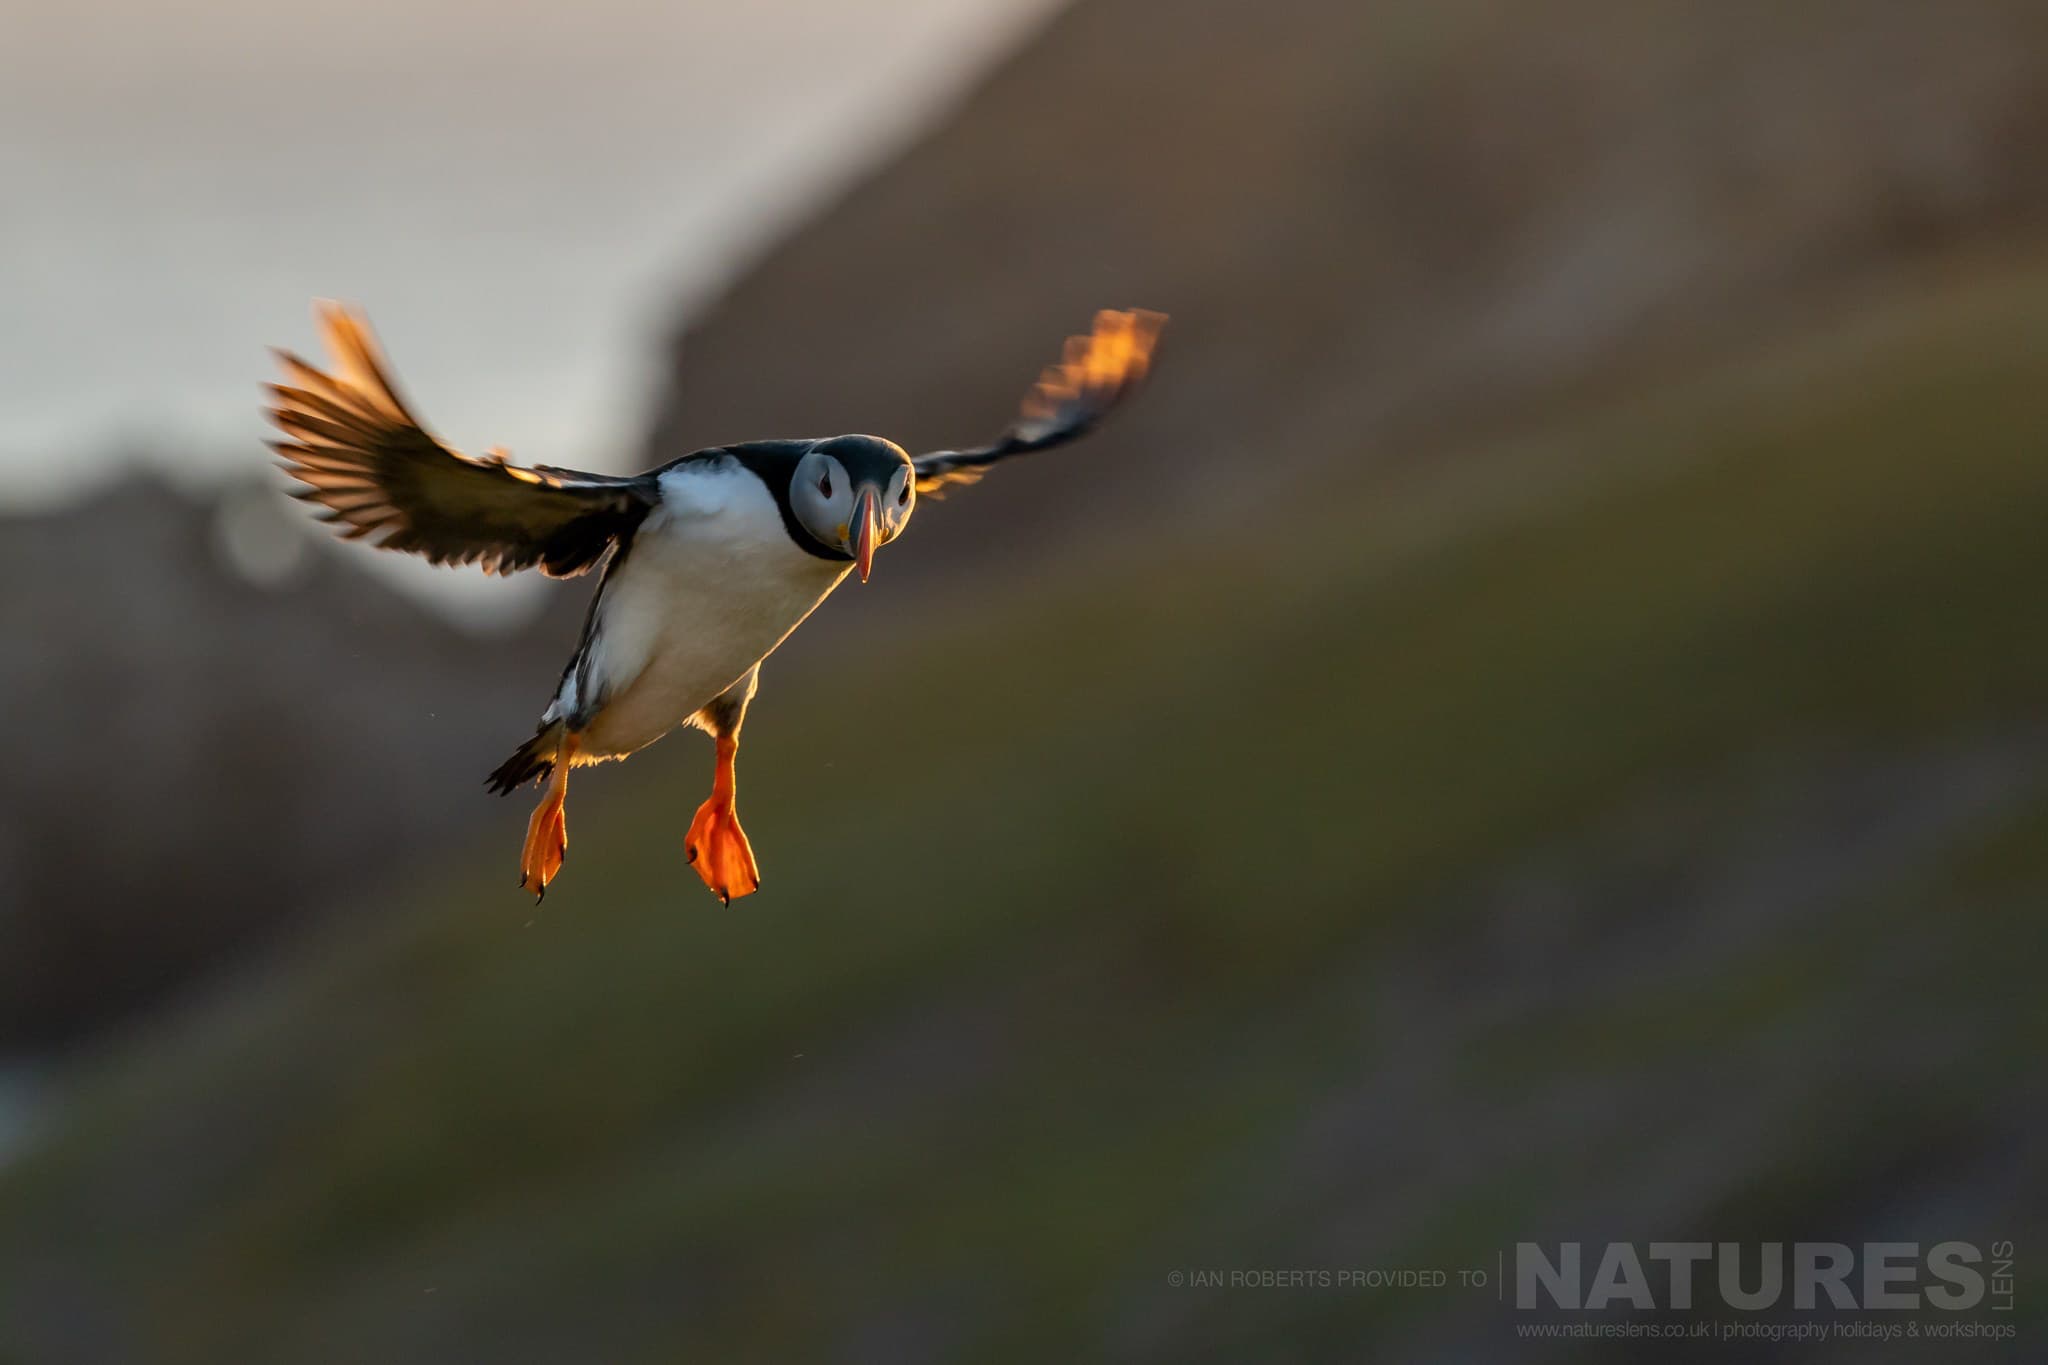 A Puffin Flies In, Illuminated From Behind By The Evening Sun This Image Was Captured By Ian Roberts During The Natureslens Welsh Puffins Of Skomer Island Photography Holiday